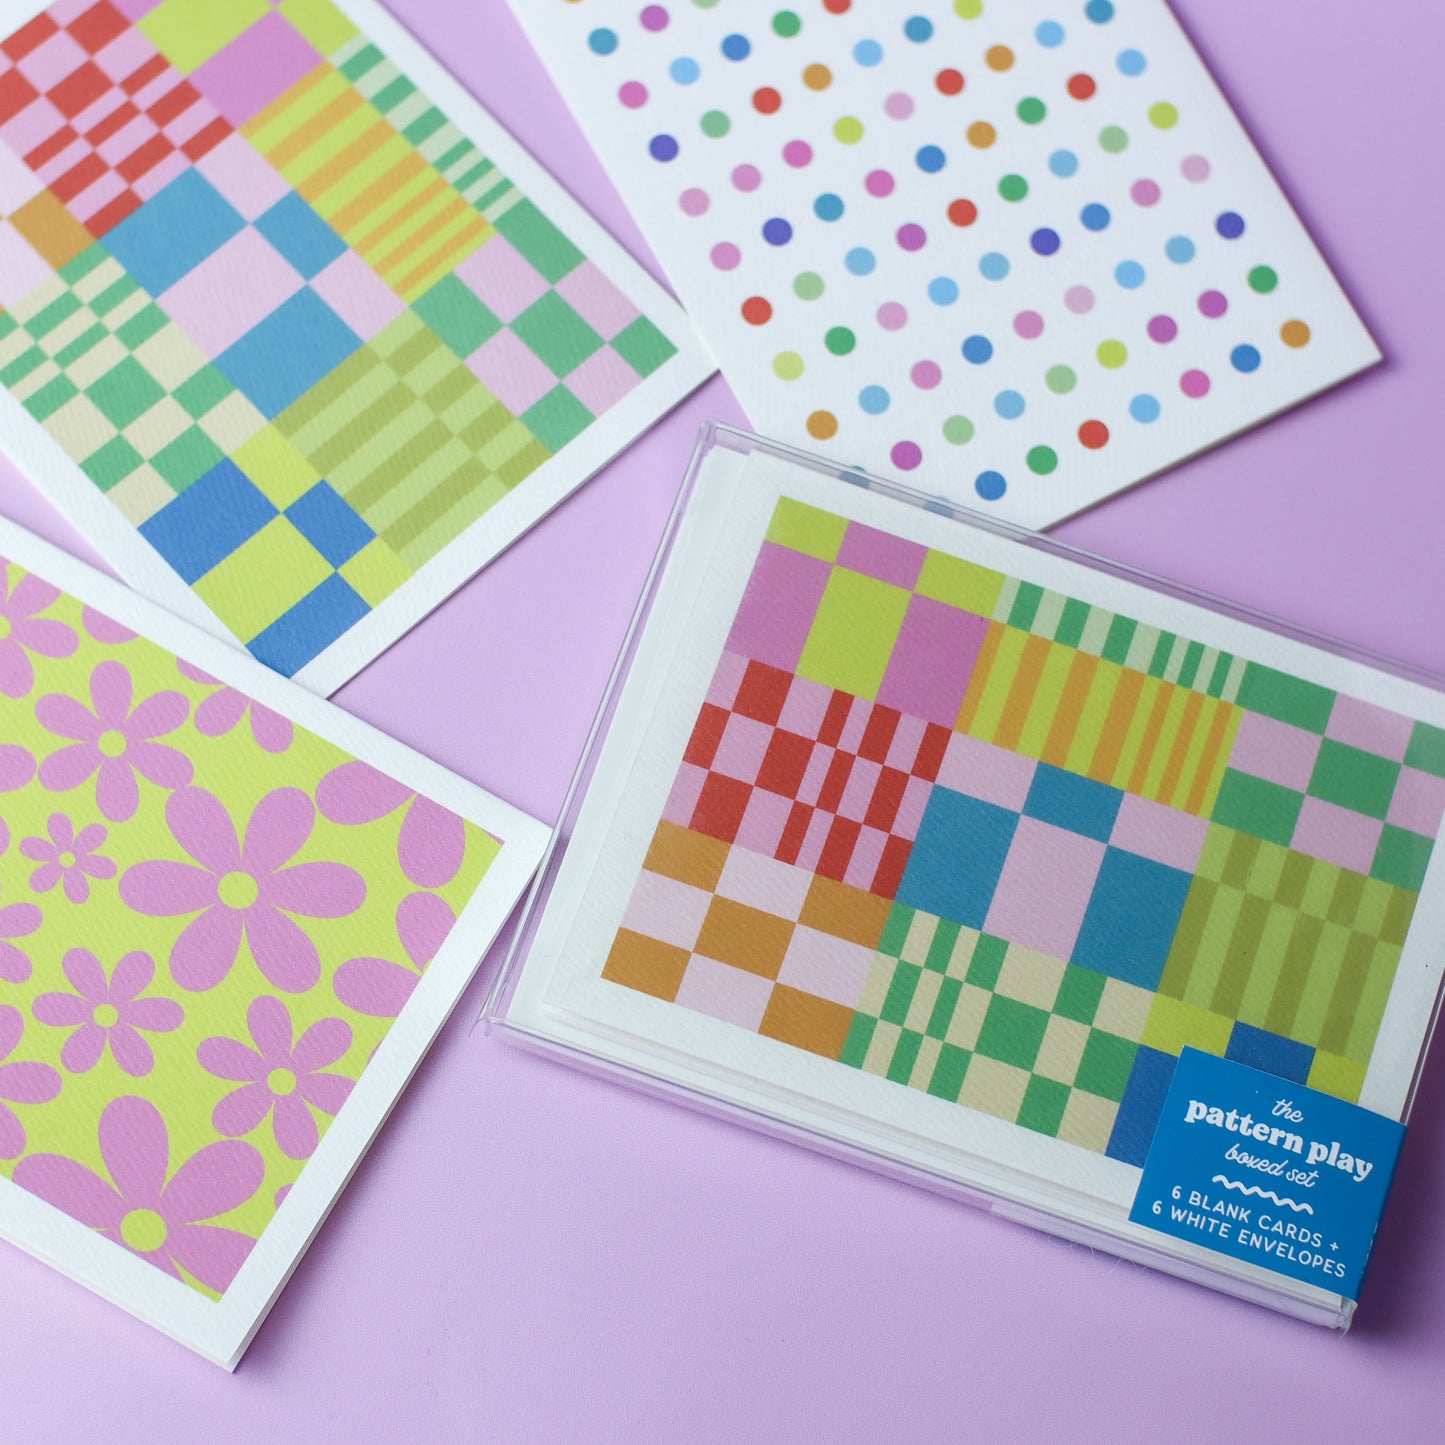 PATTERN PLAY SETS: Boxed Set of 6 Blank Cards